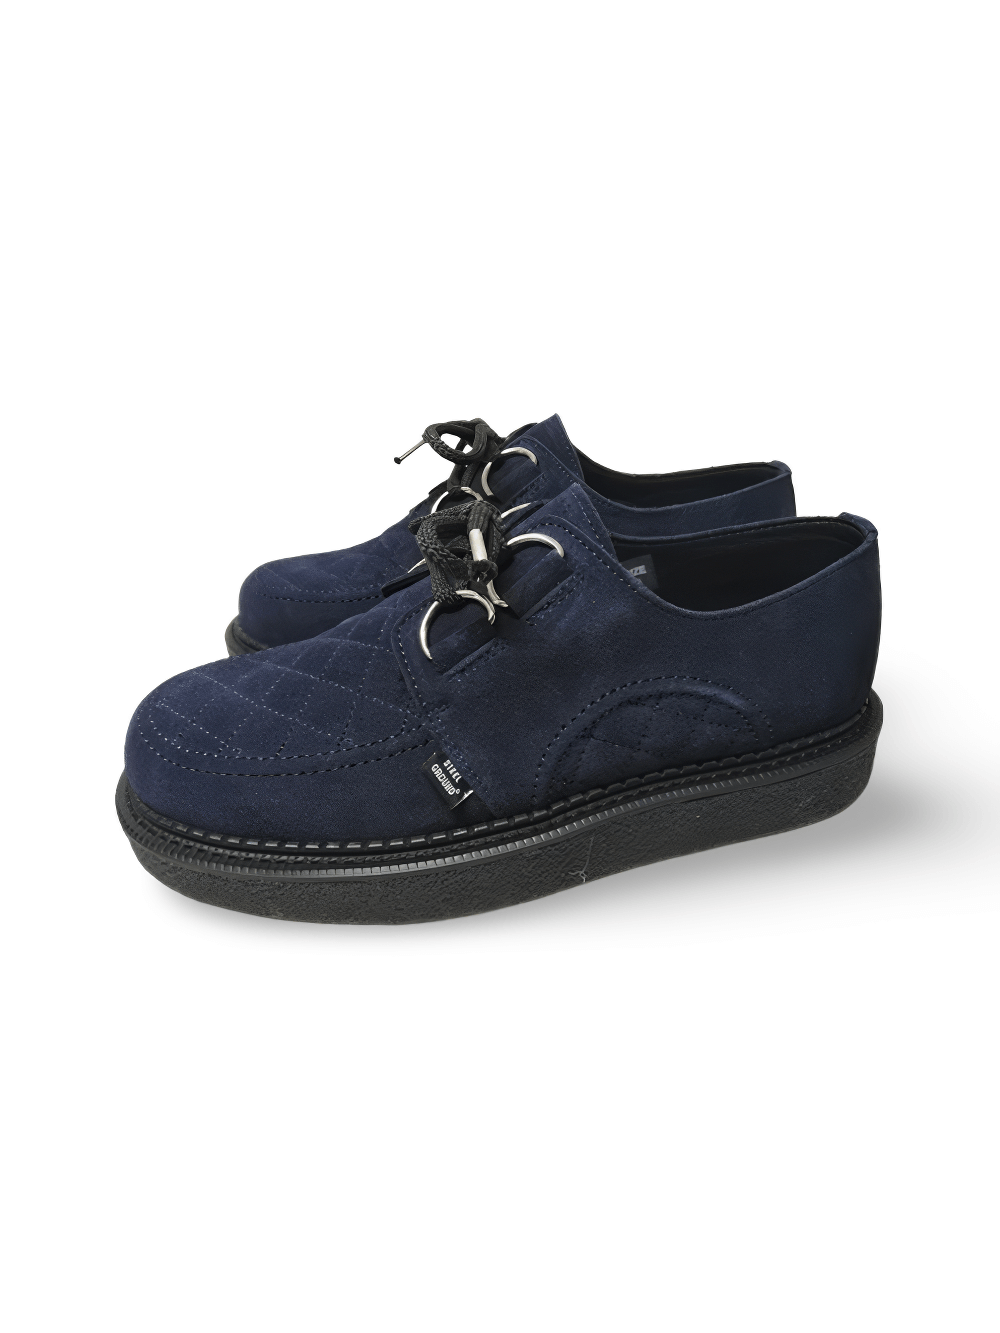 Round Toe Creepers Shoes in Navy and Black Colors Suede